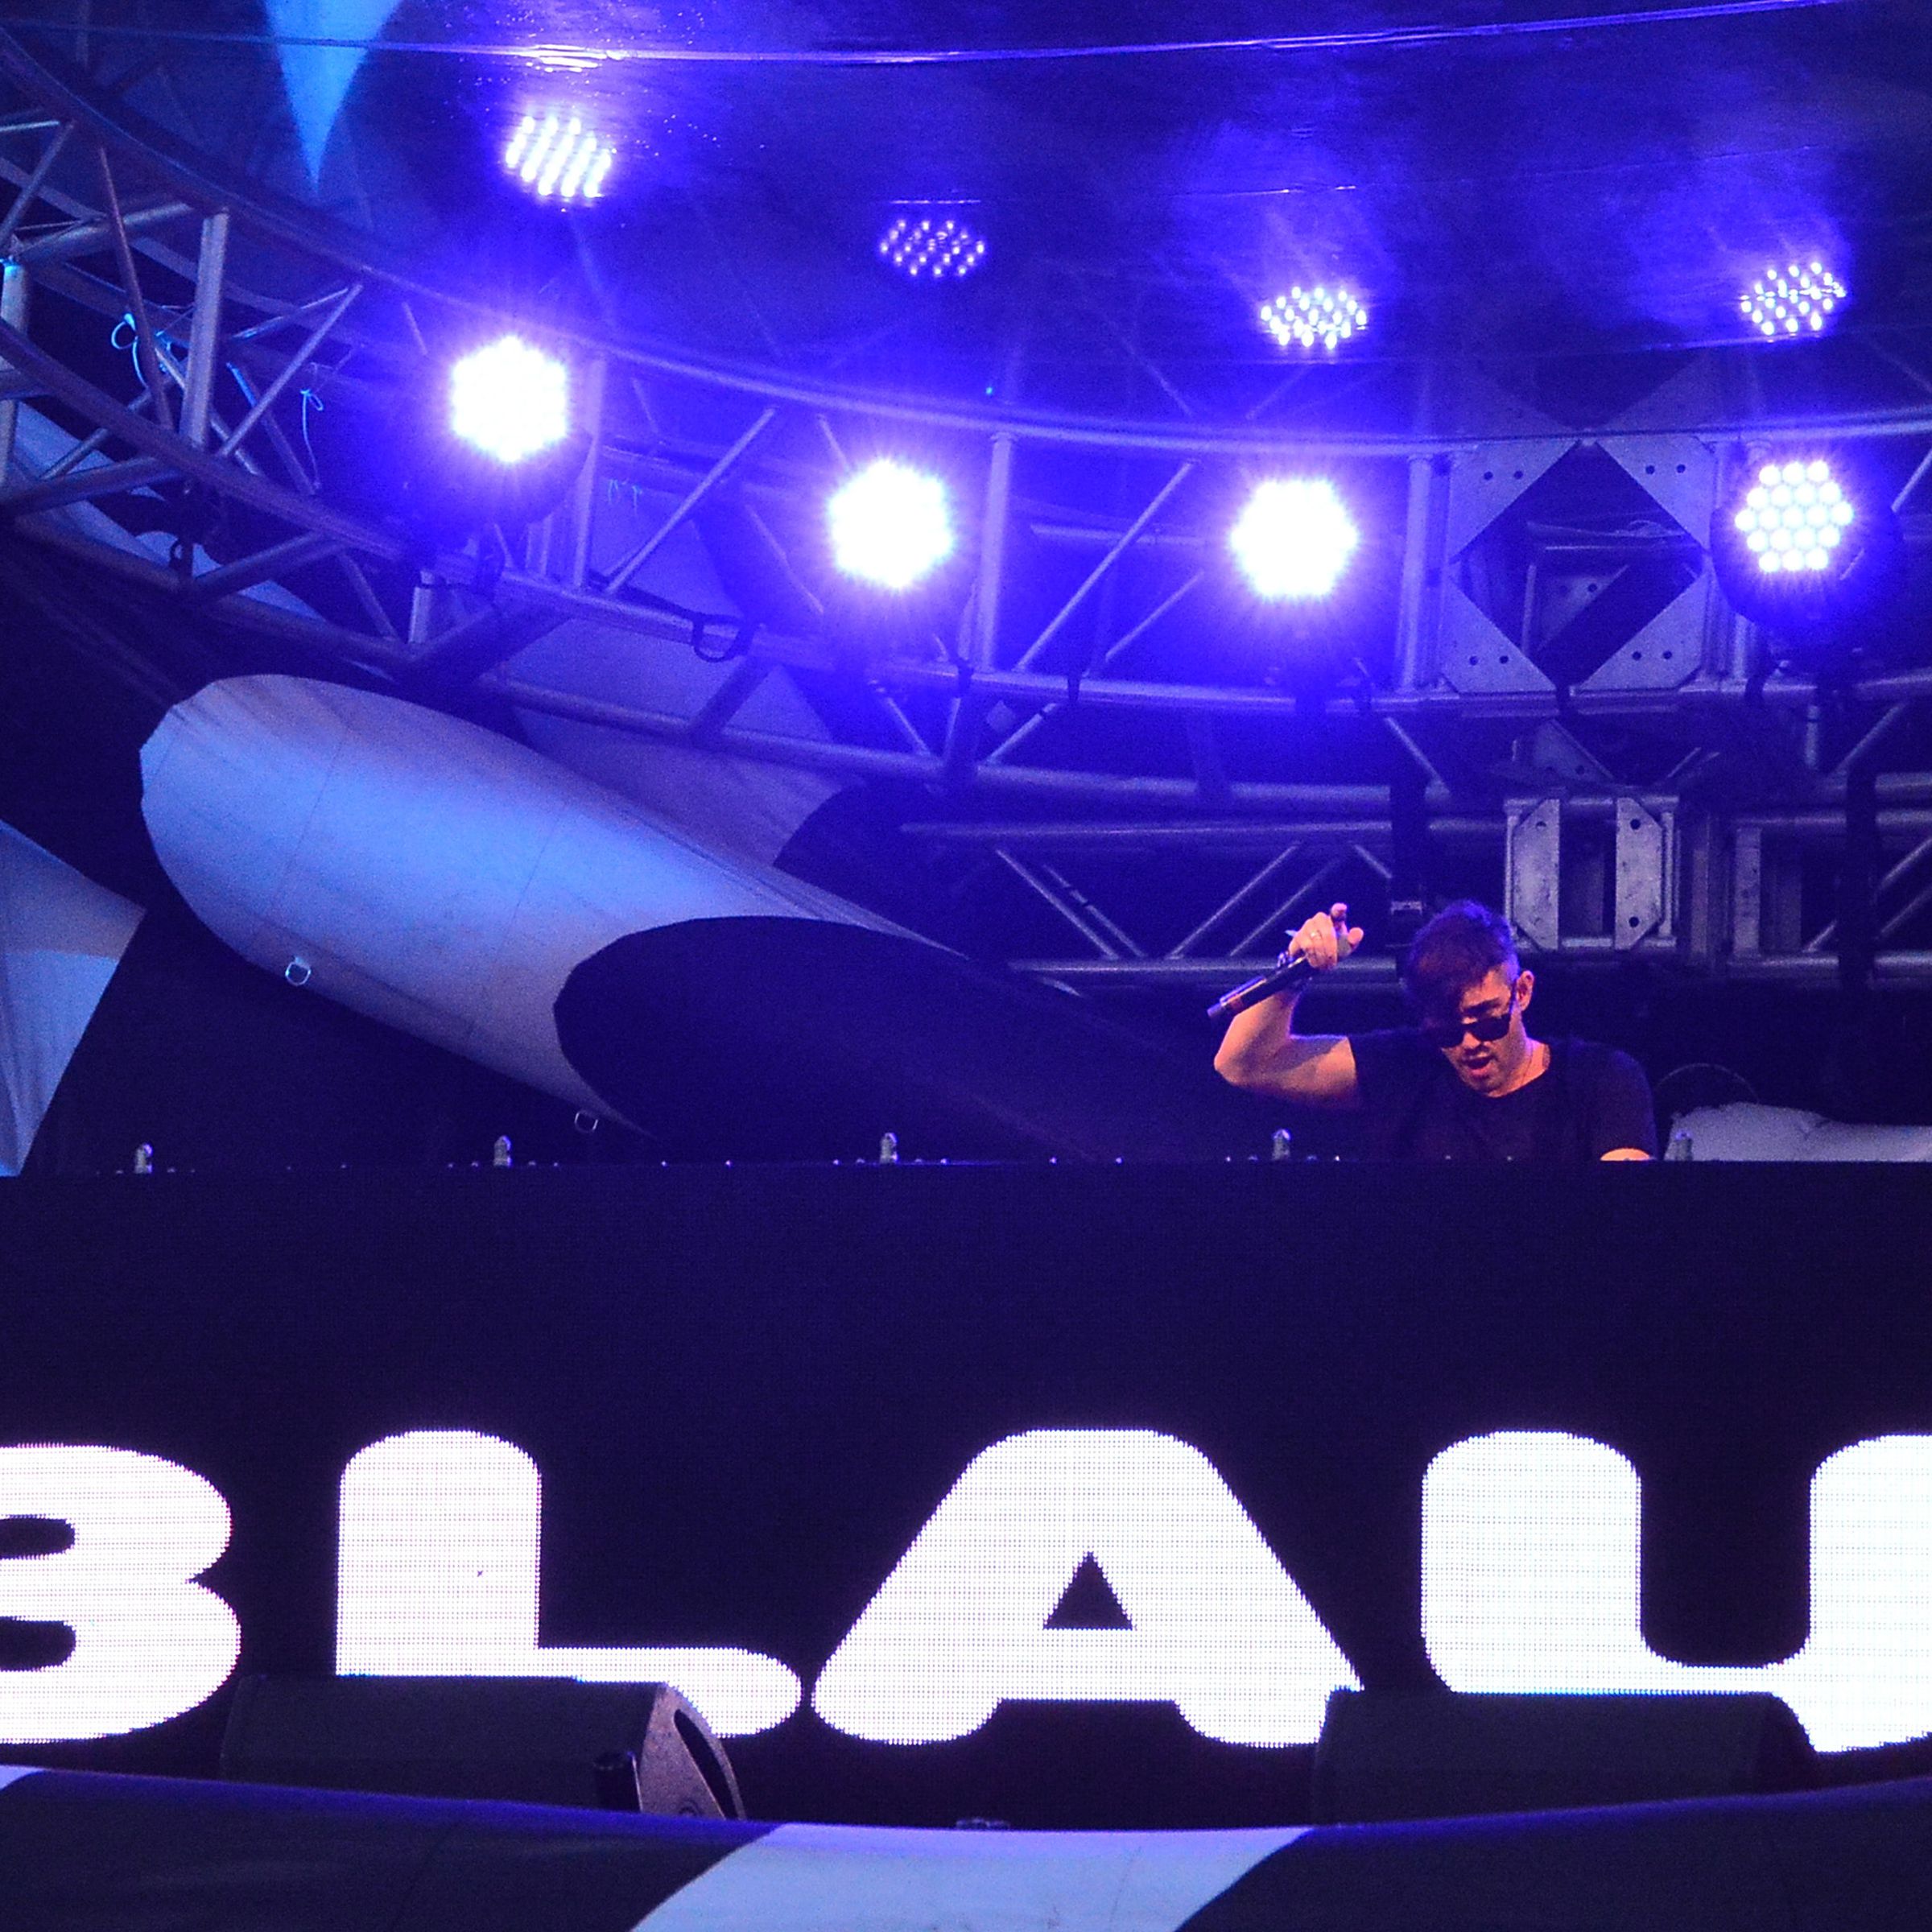 3lau, aka Justin Blau, performs during Day 2 of the Electric Zoo Wild Island Festival at Randall’s Island on September 3, 2016 in New York City.